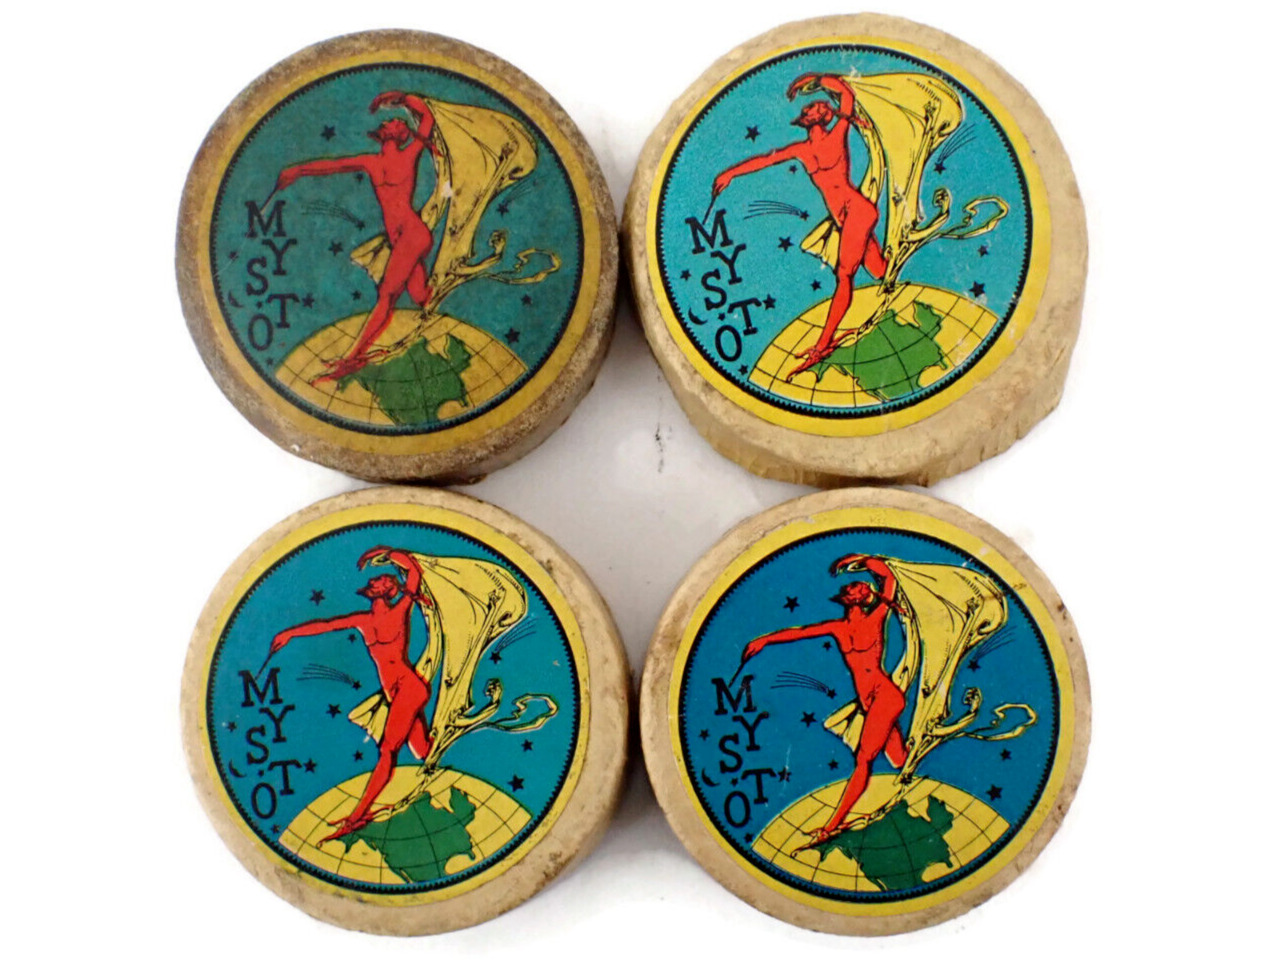 1920s era Gilberts Mysto Red Devil Magic Trick Lithographed Paper Caps for Parts